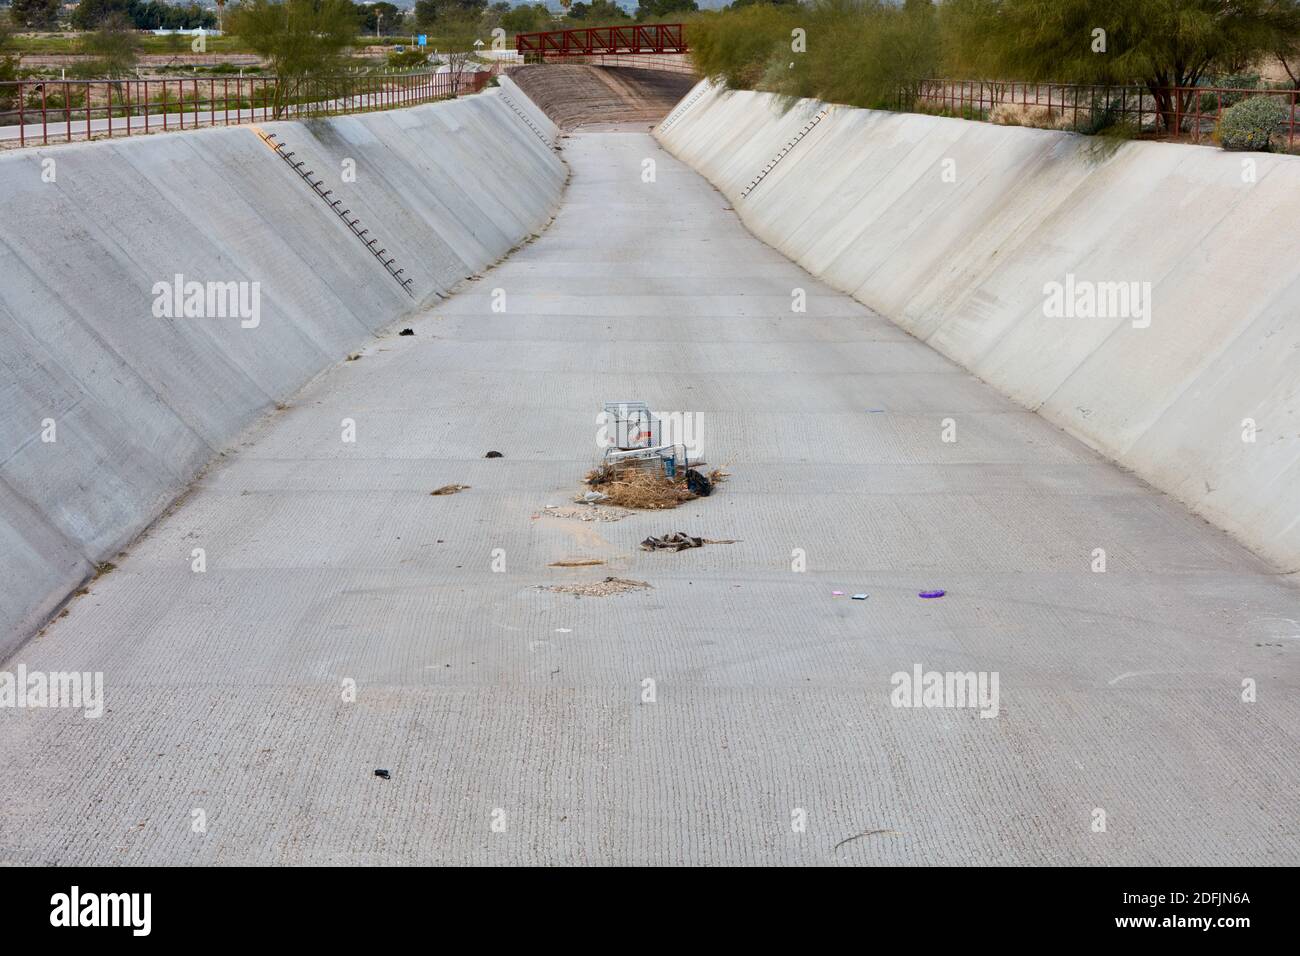 Shopping carts in the middle of a drainage canal leading to the Santa Cruz River, Tucson, Arizona Stock Photo